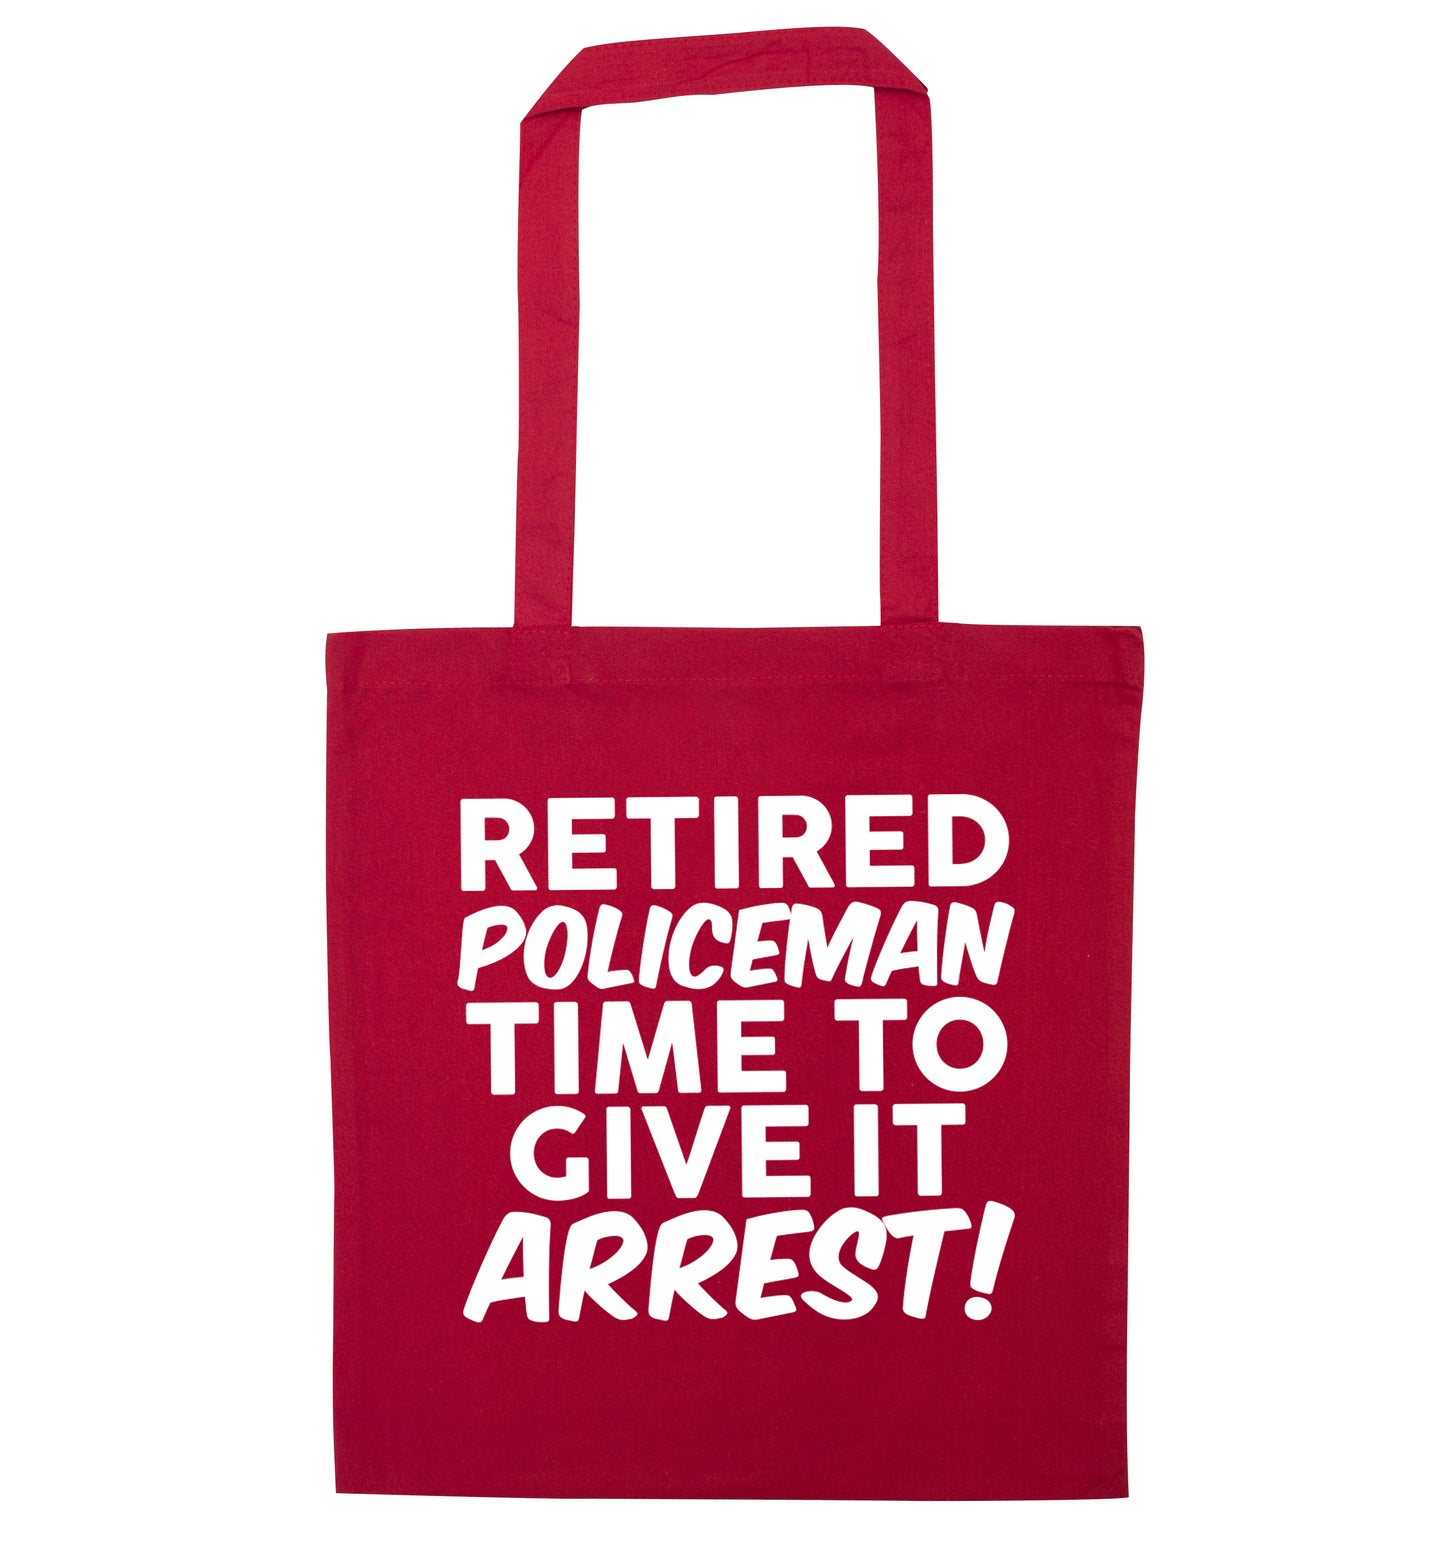 Retired policeman give it arresst! red tote bag